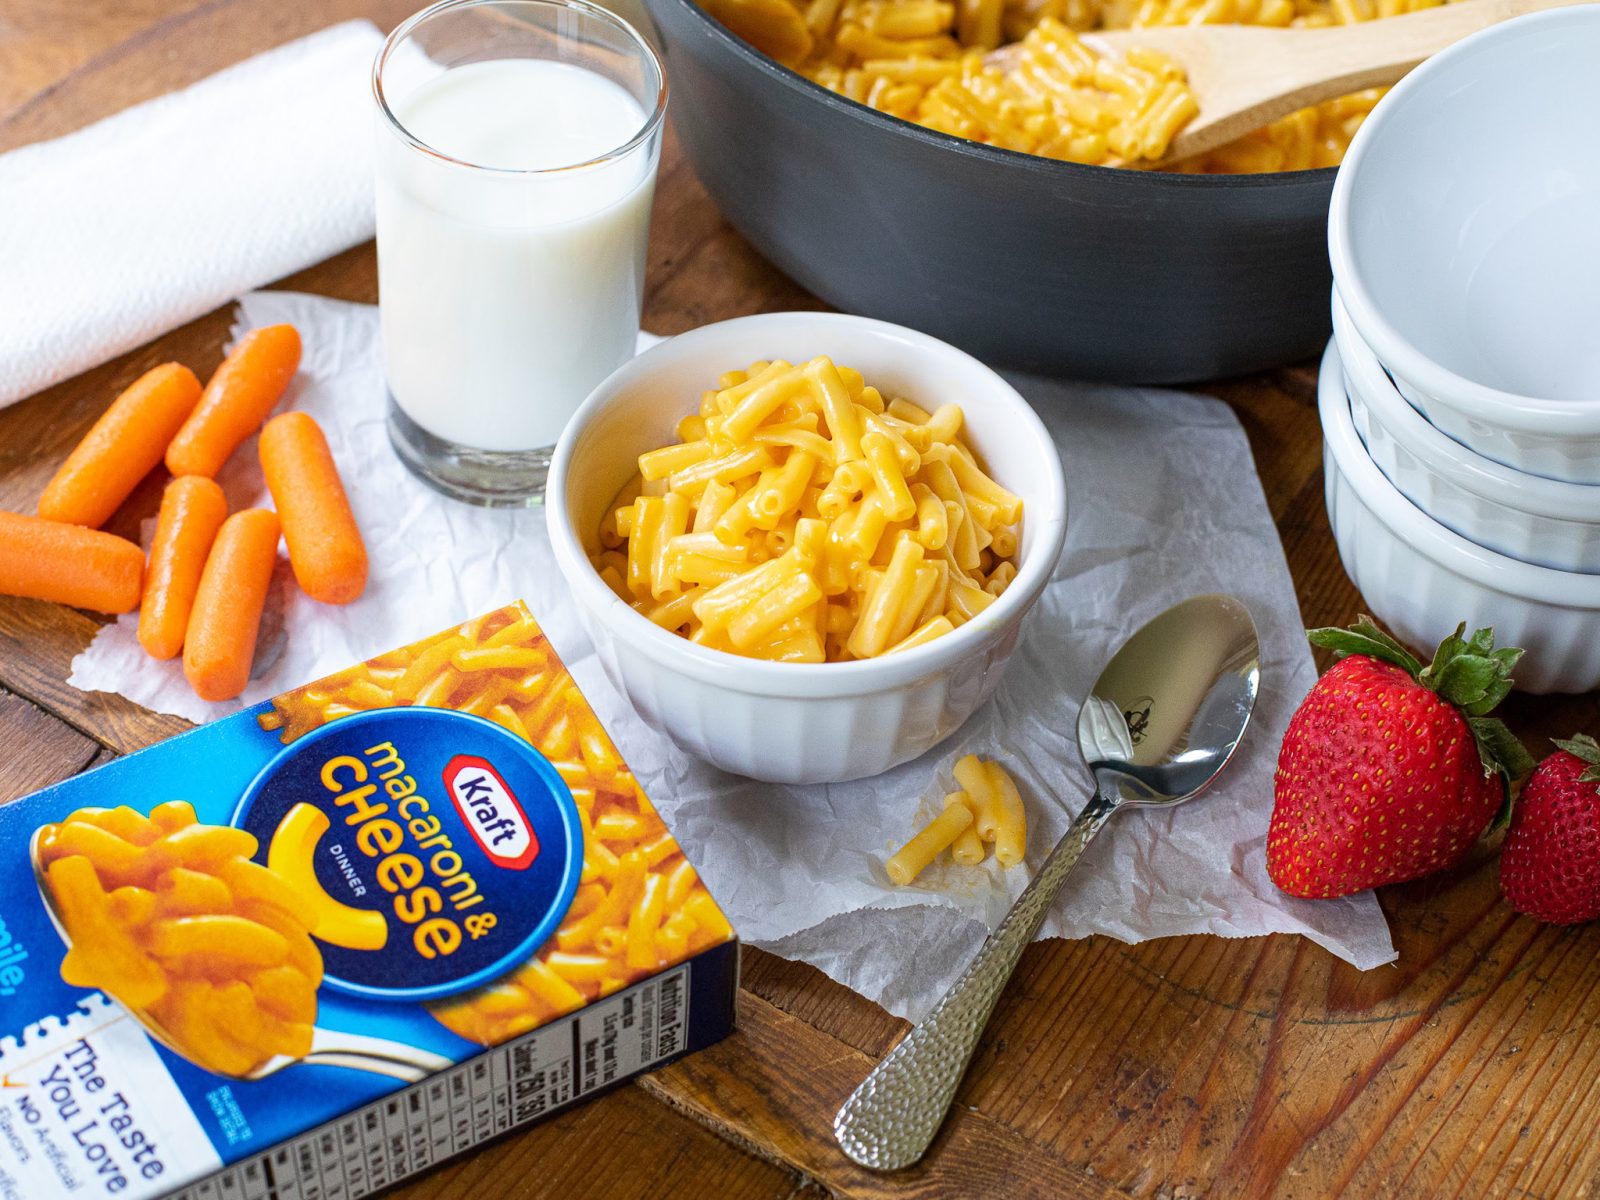 Kraft Macaroni And Cheese As Low As 75¢ At Kroger